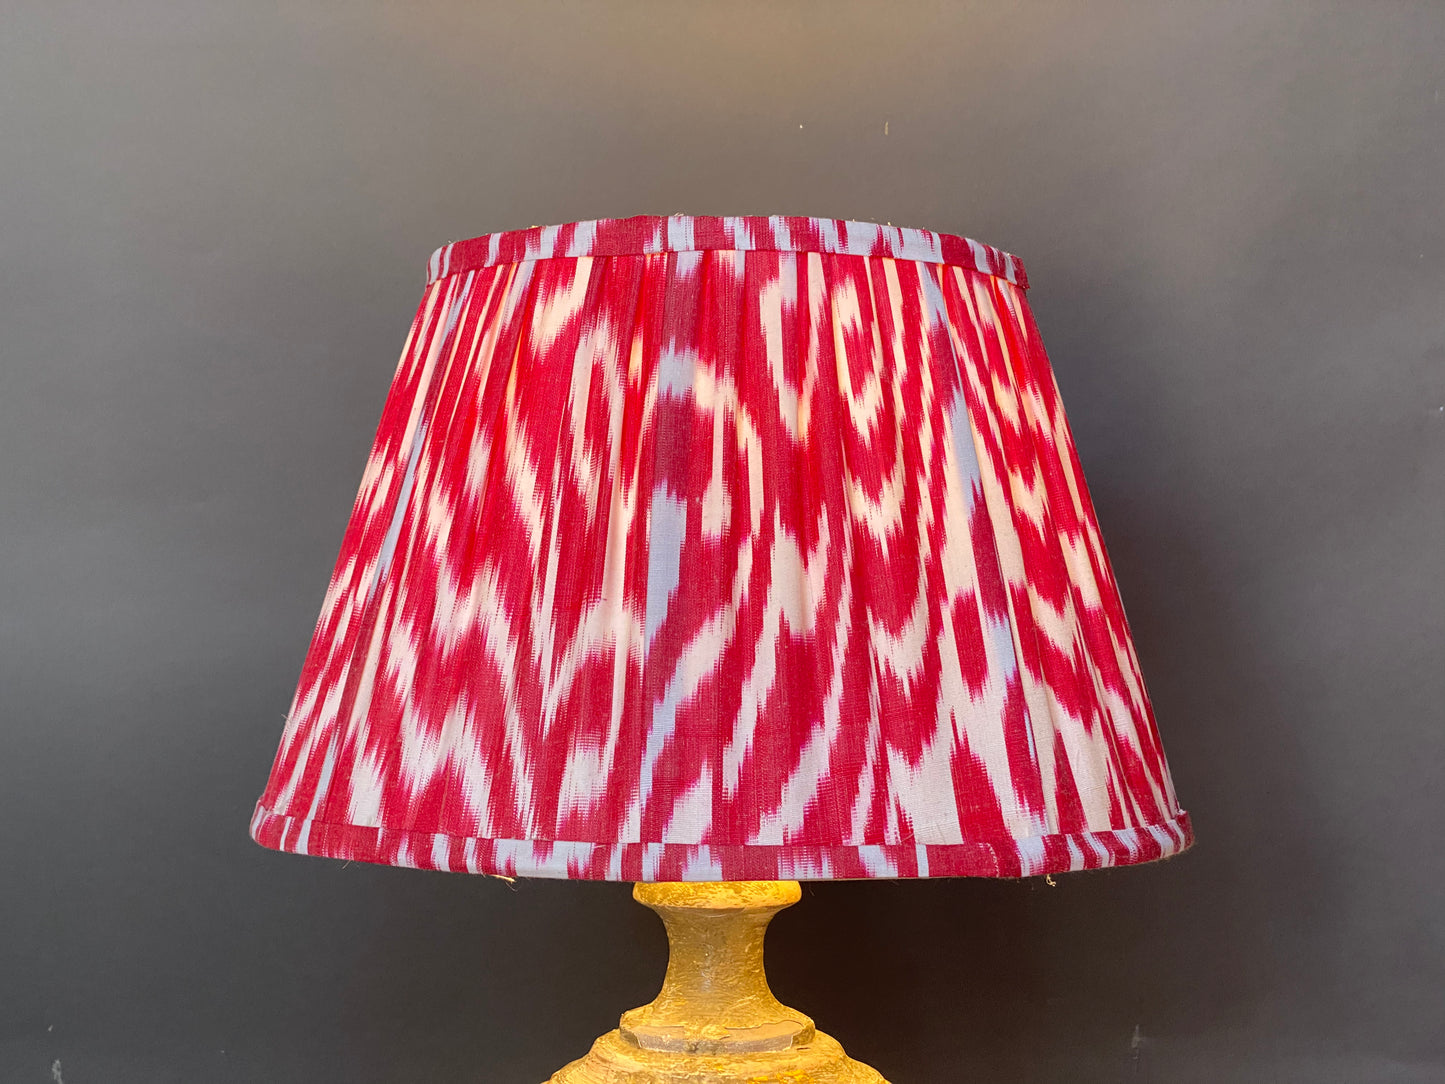 Red and white ikat silk lampshade shown lit on a grey background